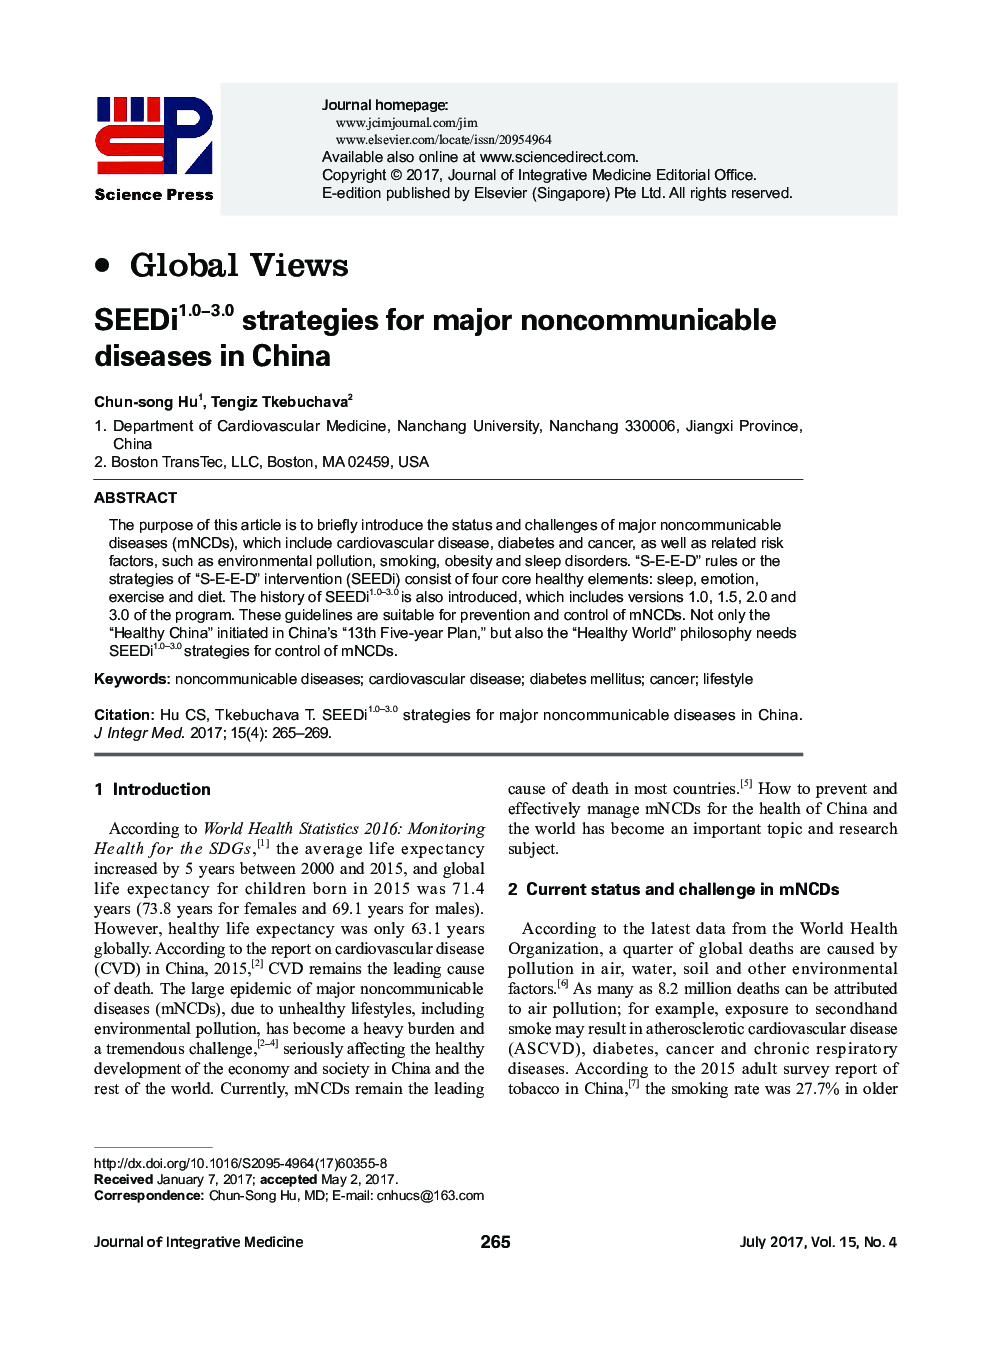 SEEDi1.0-3.0 strategies for major noncommunicable diseases in China